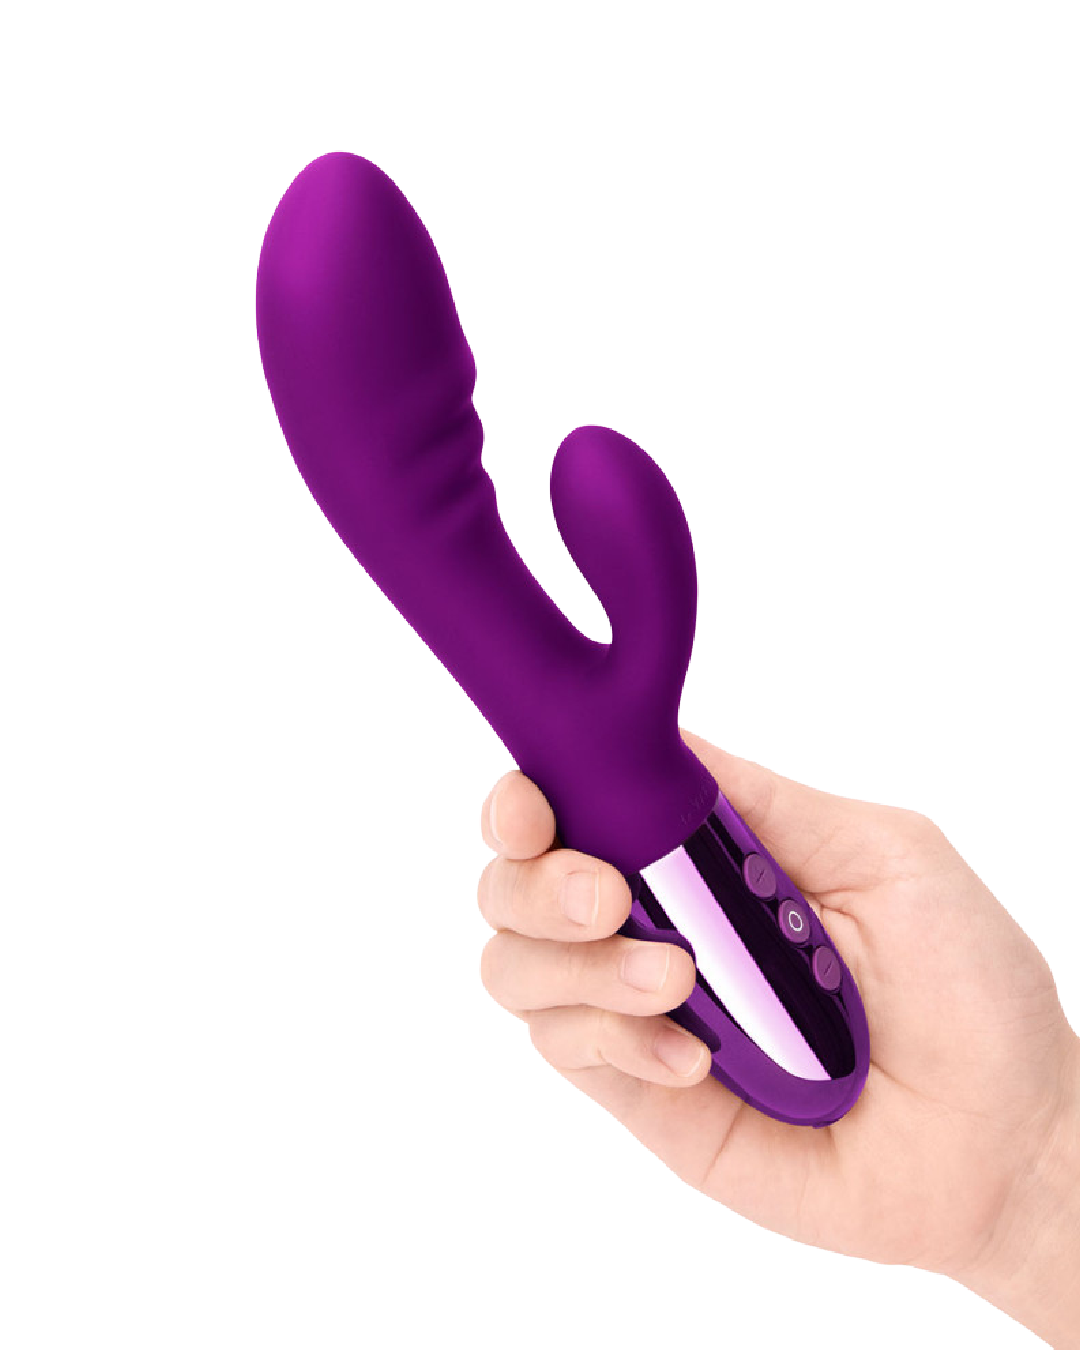 Le Wand Blend Double Motor Rechargeable Rabbit Vibrator - Dark Cherry held in a hand